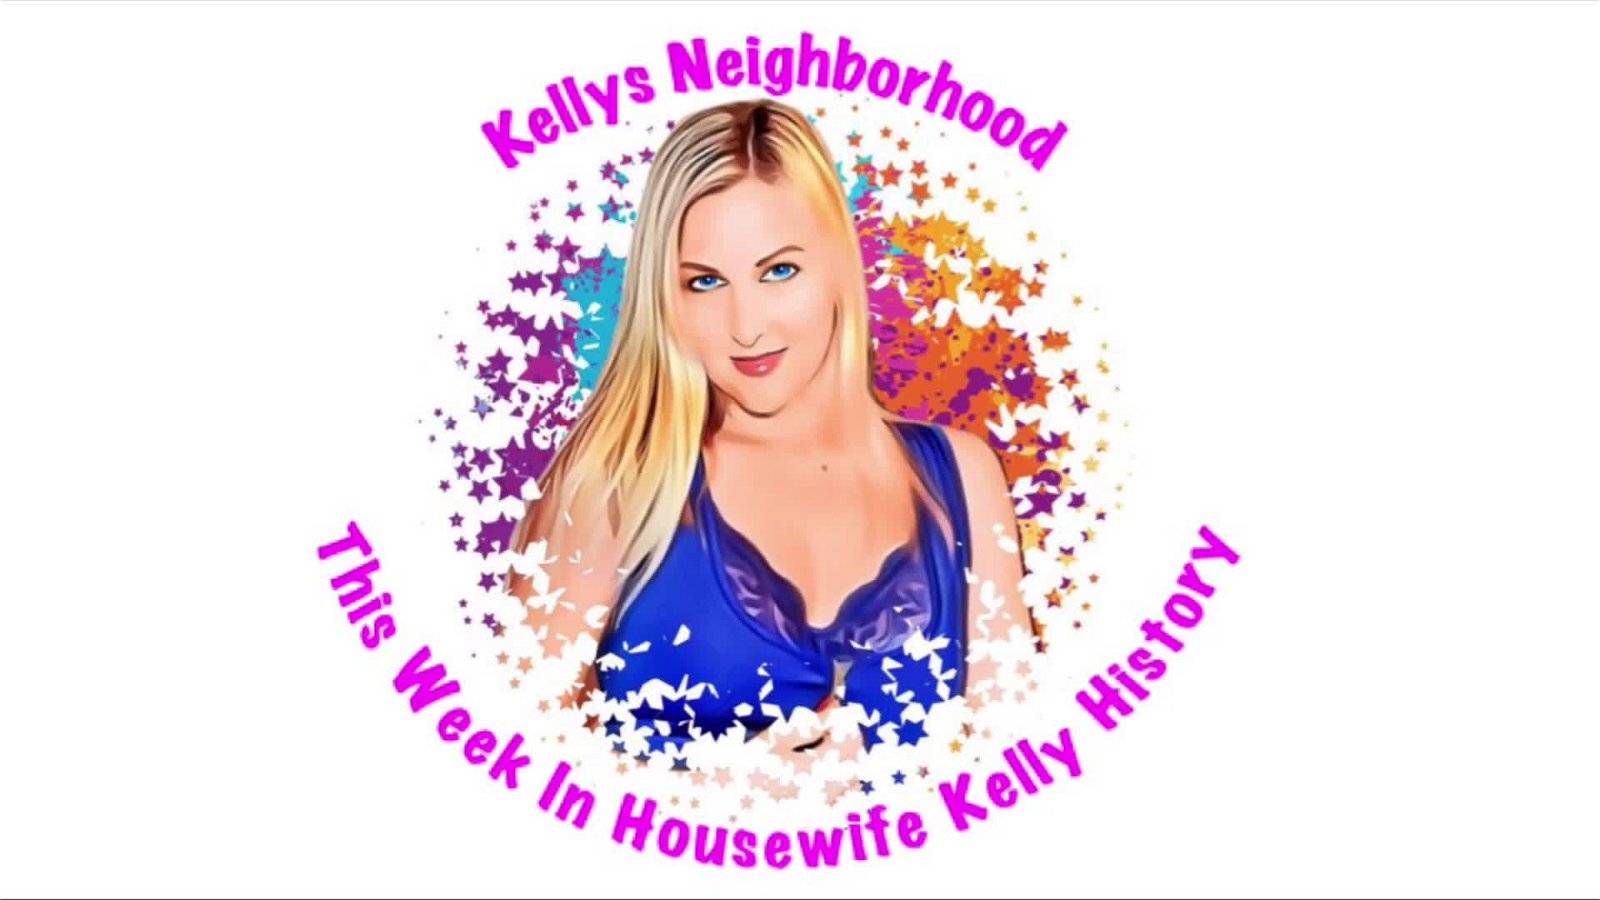 Shared Video by Kellys Neighborhood with the username @KellysNeighbor, who is a star user,  April 29, 2024 at 9:55 AM. The post is about the topic Videos